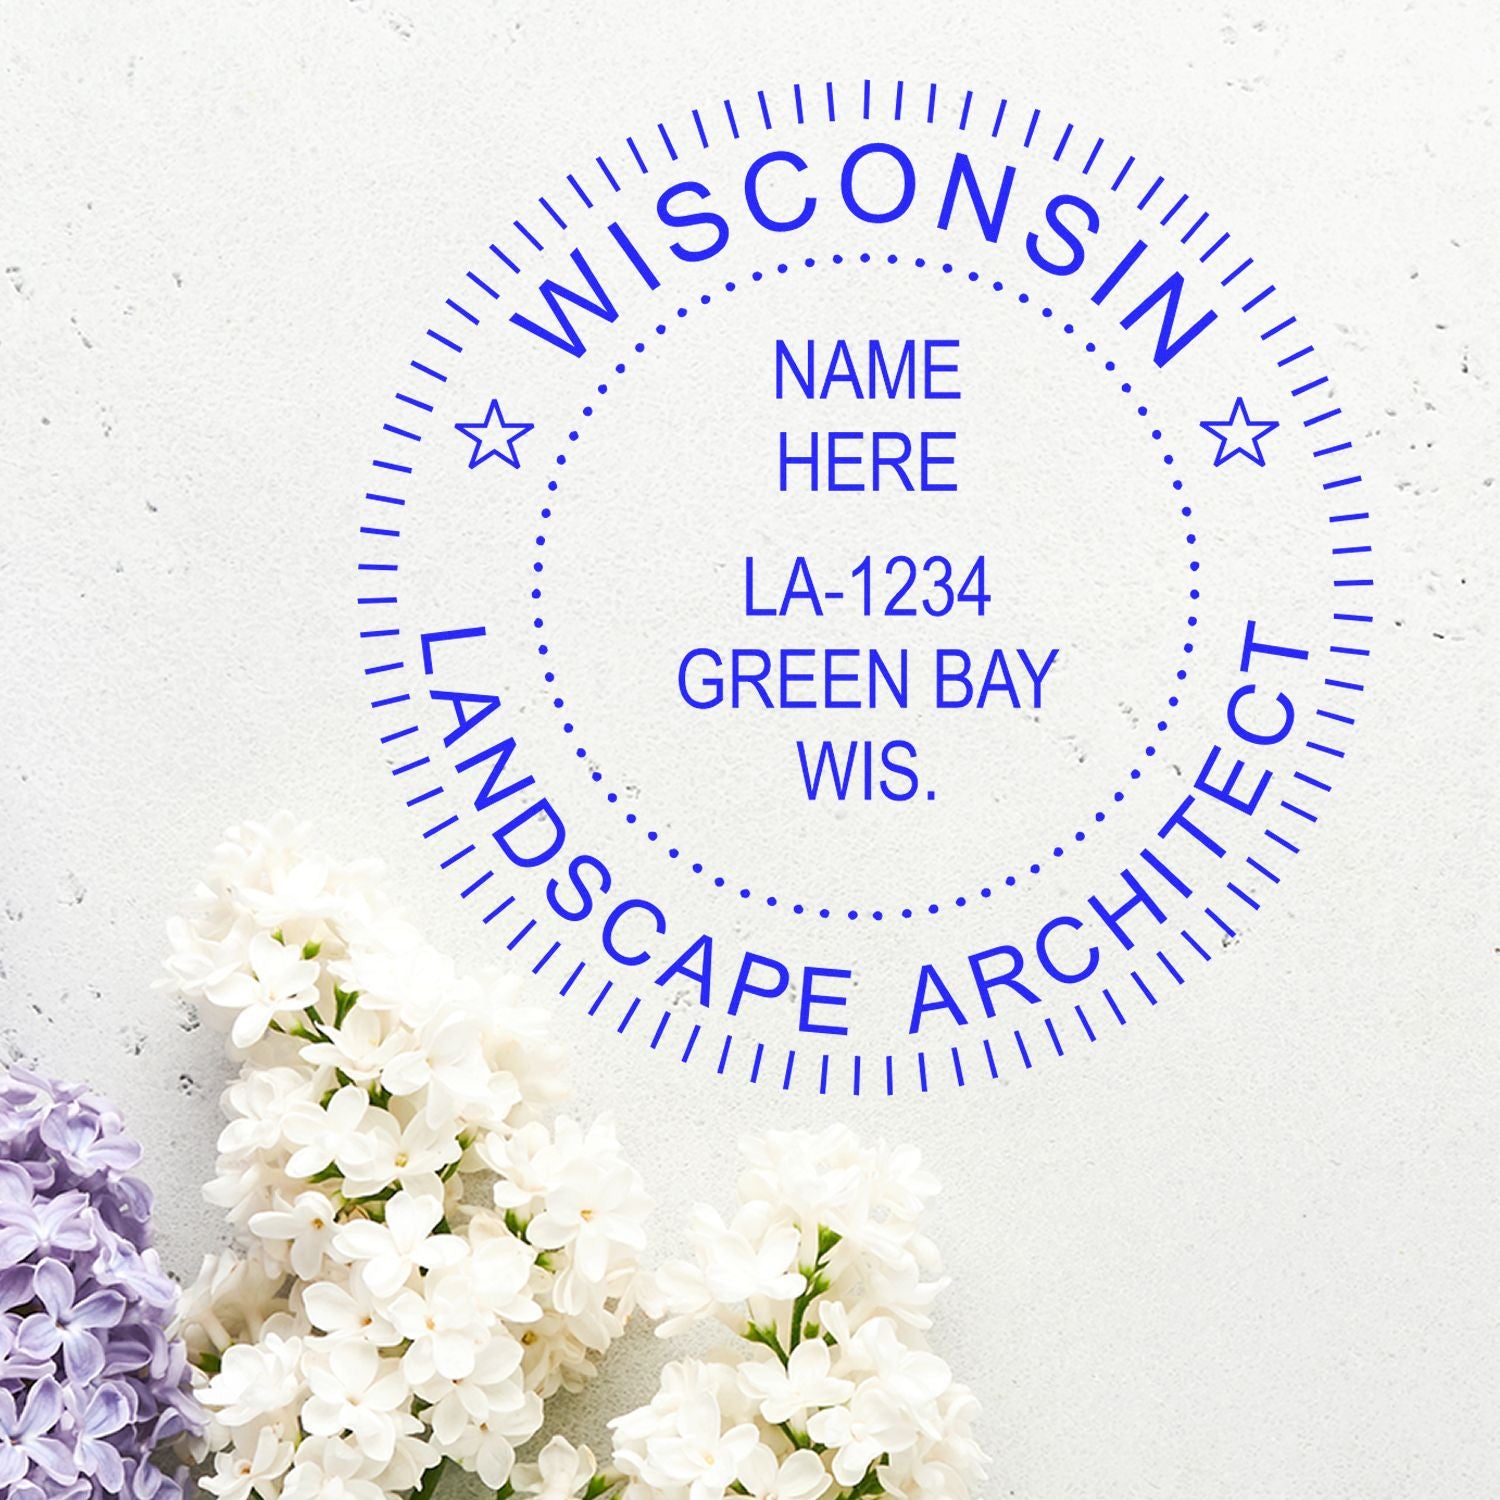 Wisconsin Landscape Architect Stamp and Seal: Your Essential Guidelines Unveiled Feature Image